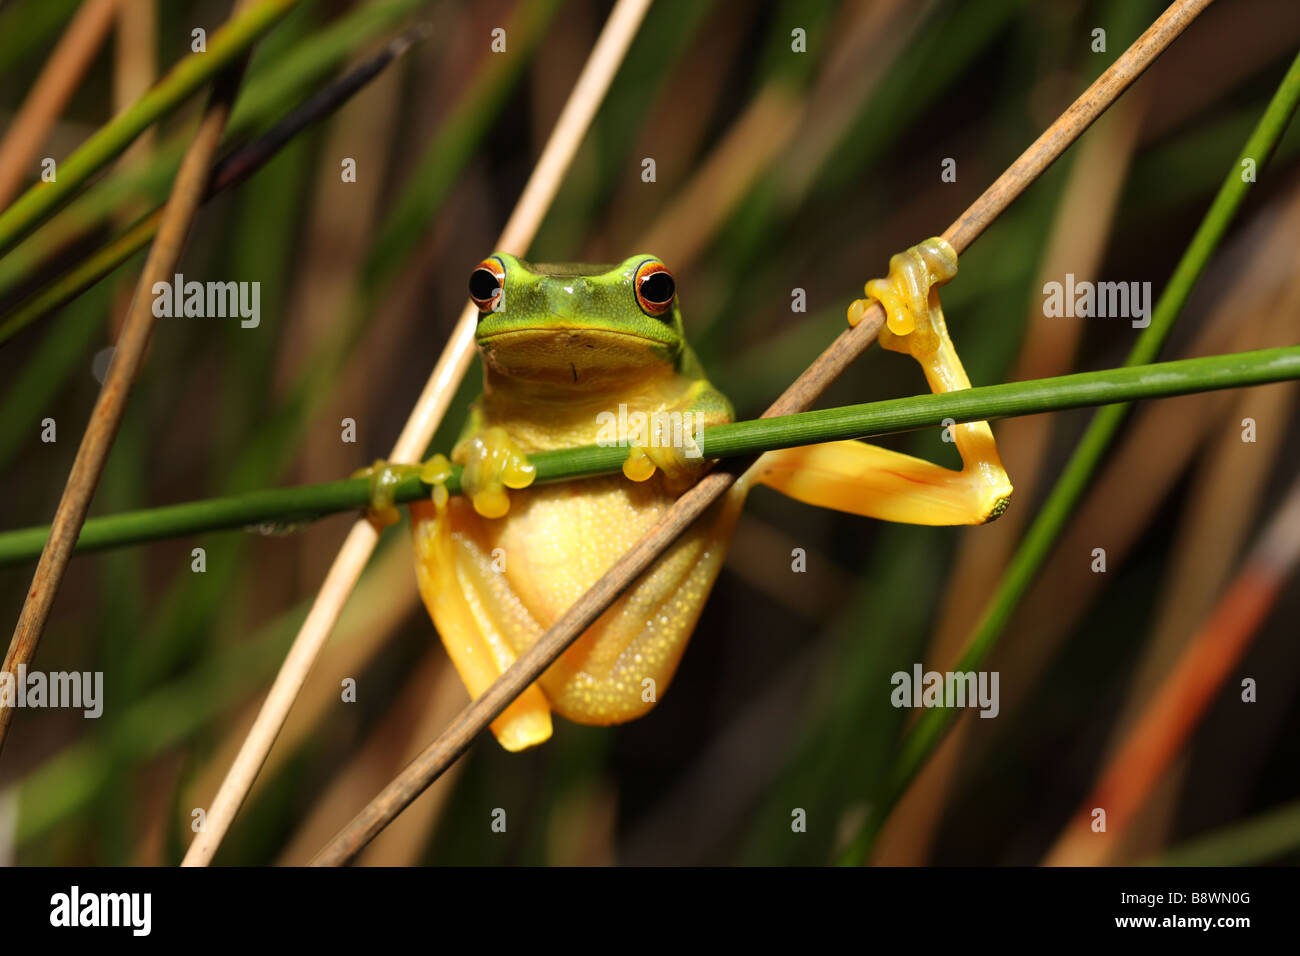 An adult Graceful Tree Frog native to Australia clings to sedges Stock Photo